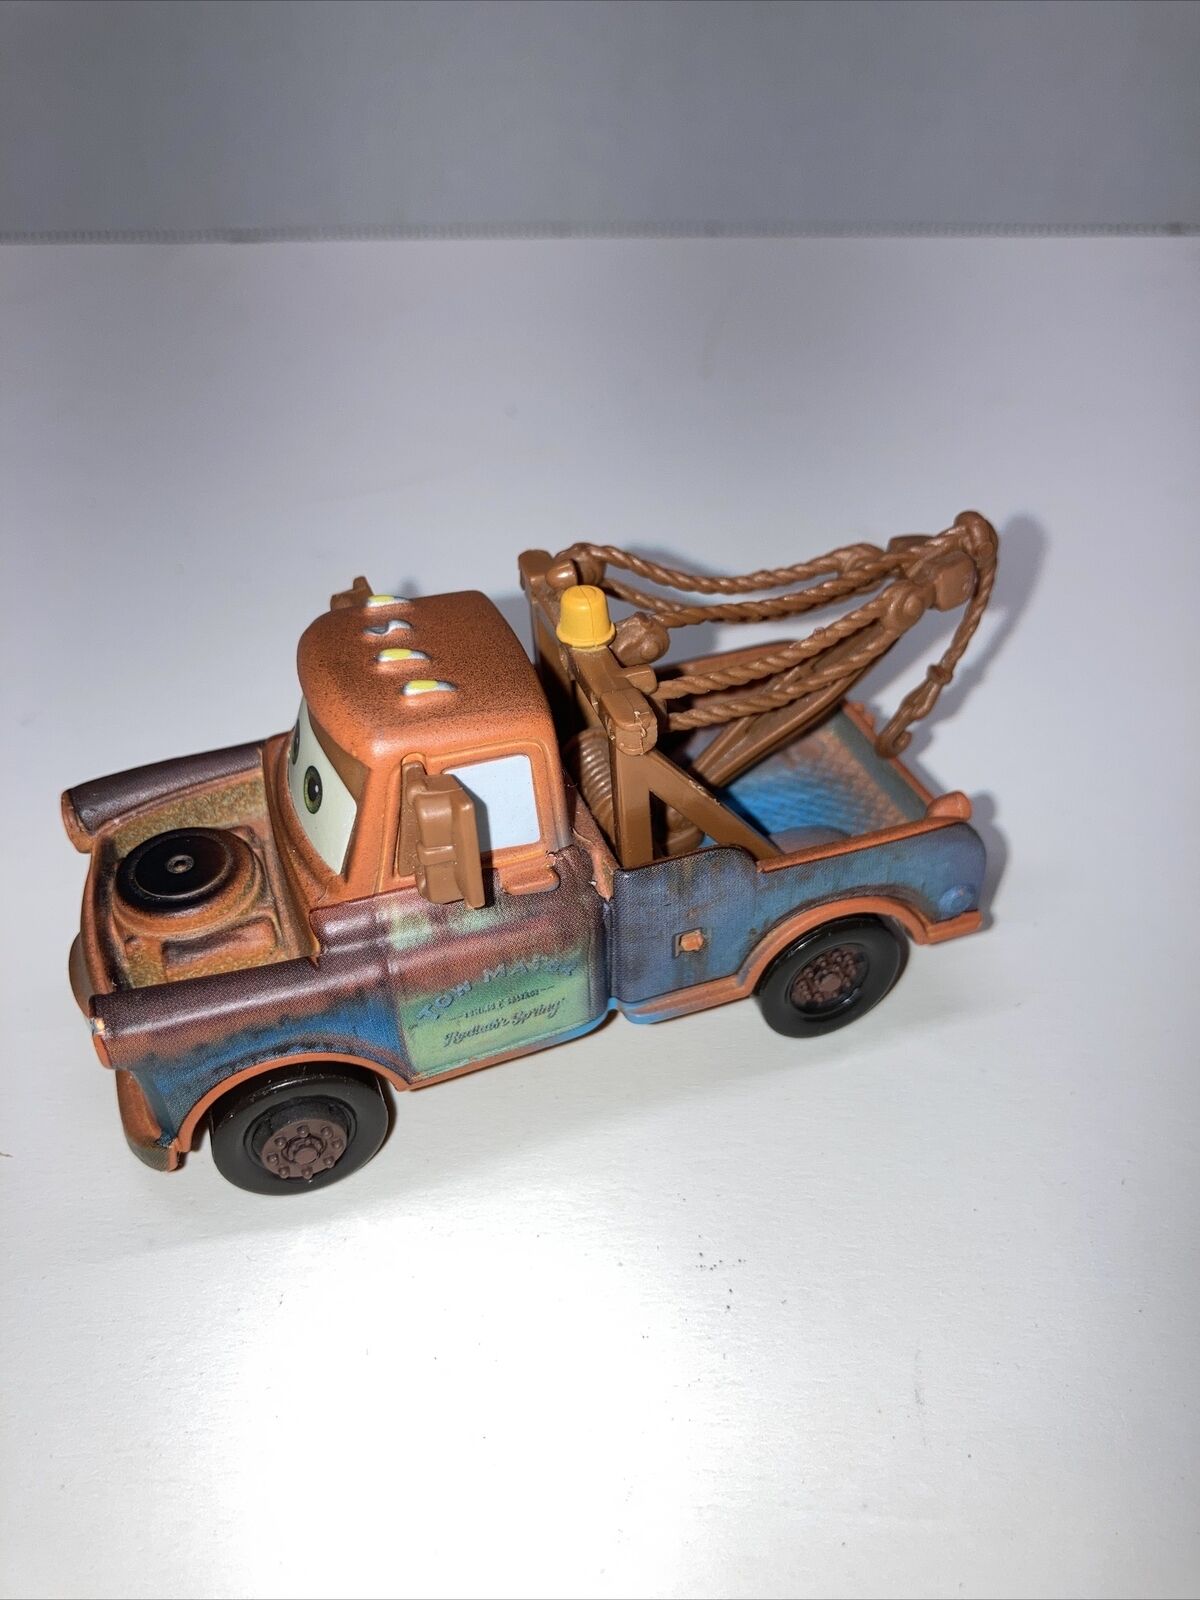 Disney Cars Mater DieCast 2008 Made In Thailand. Great Condition